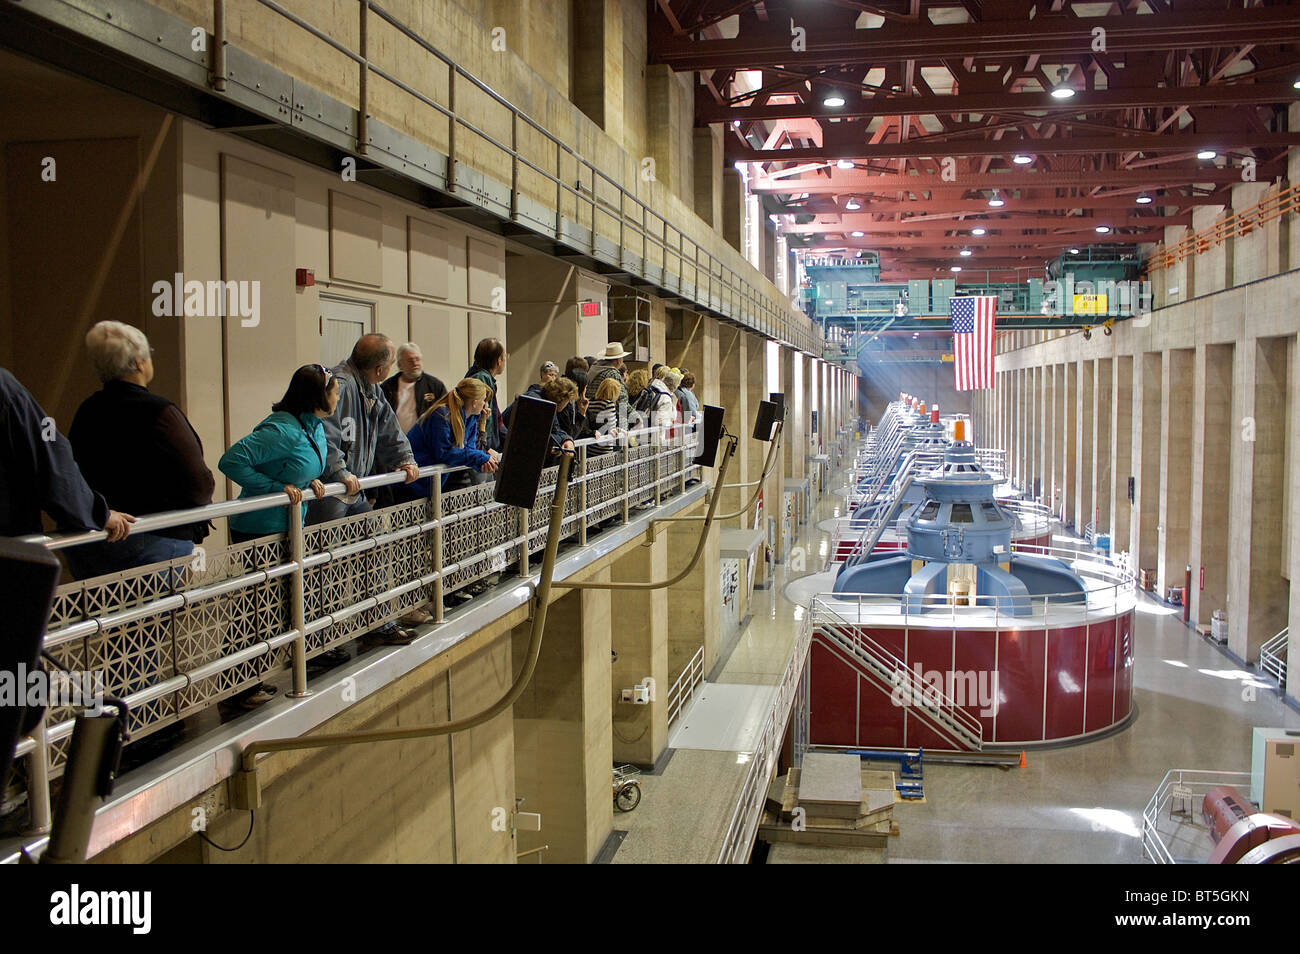 People on a guided tour of the Hoover dam look at the dam's power-generating turbines Stock Photo